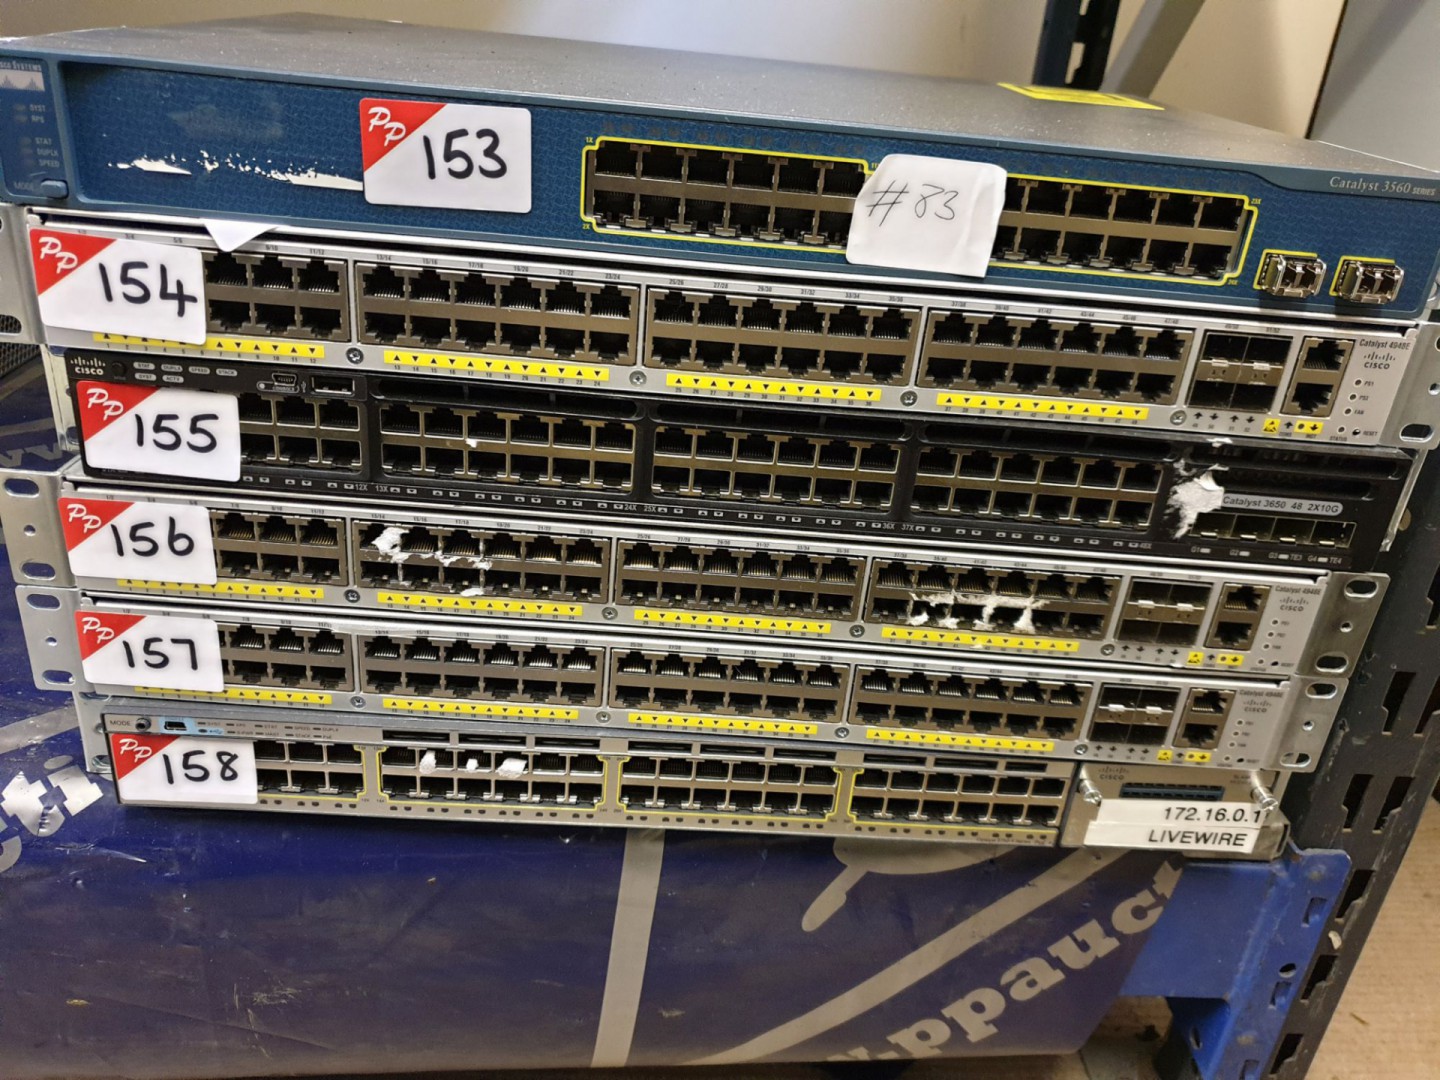 Cisco Systems Catalyst 3650 network switch